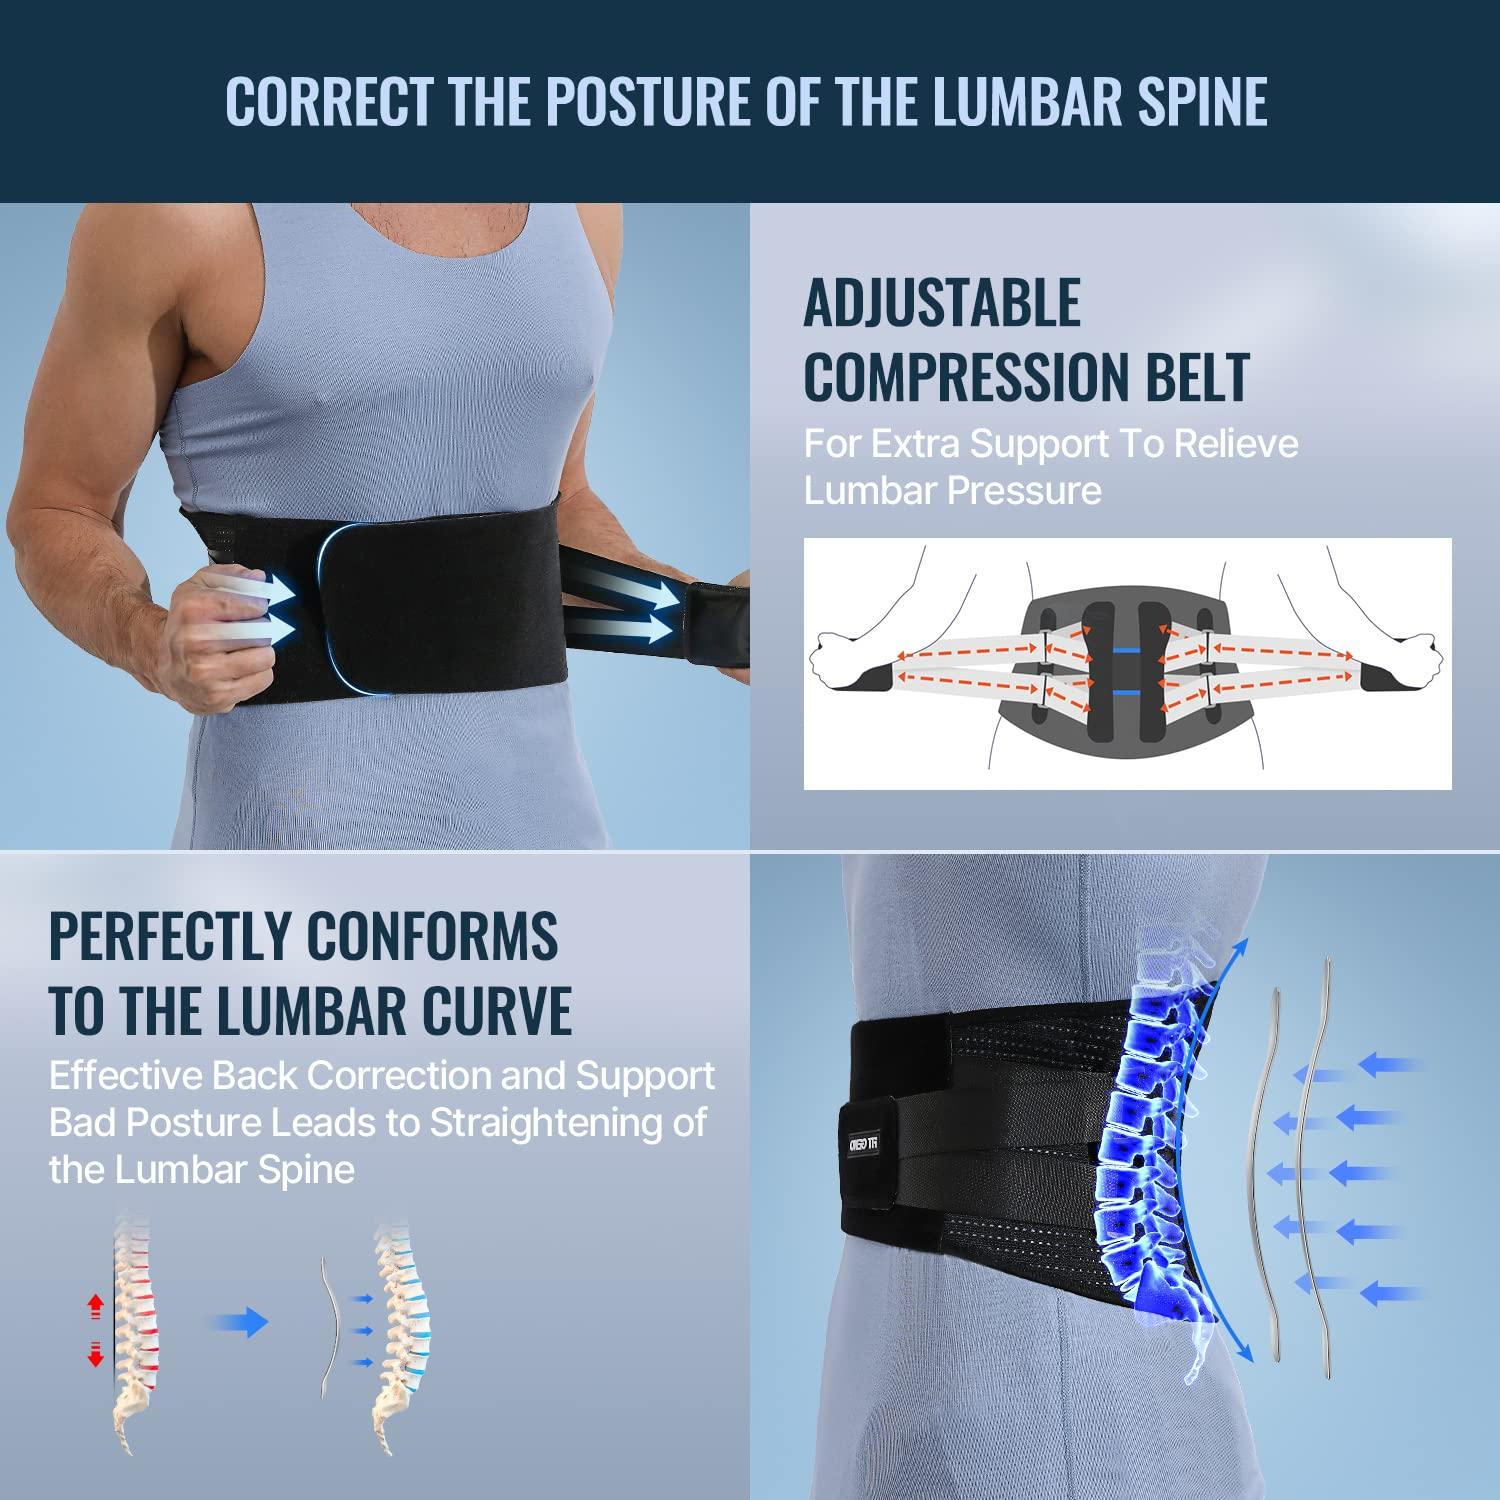 Fit Geno Back Brace for Lower Back Pain: Back Support Lumbar Belt for Women and Men - Breathable Lower Back Pain Relief Herniated Disc Sciatica